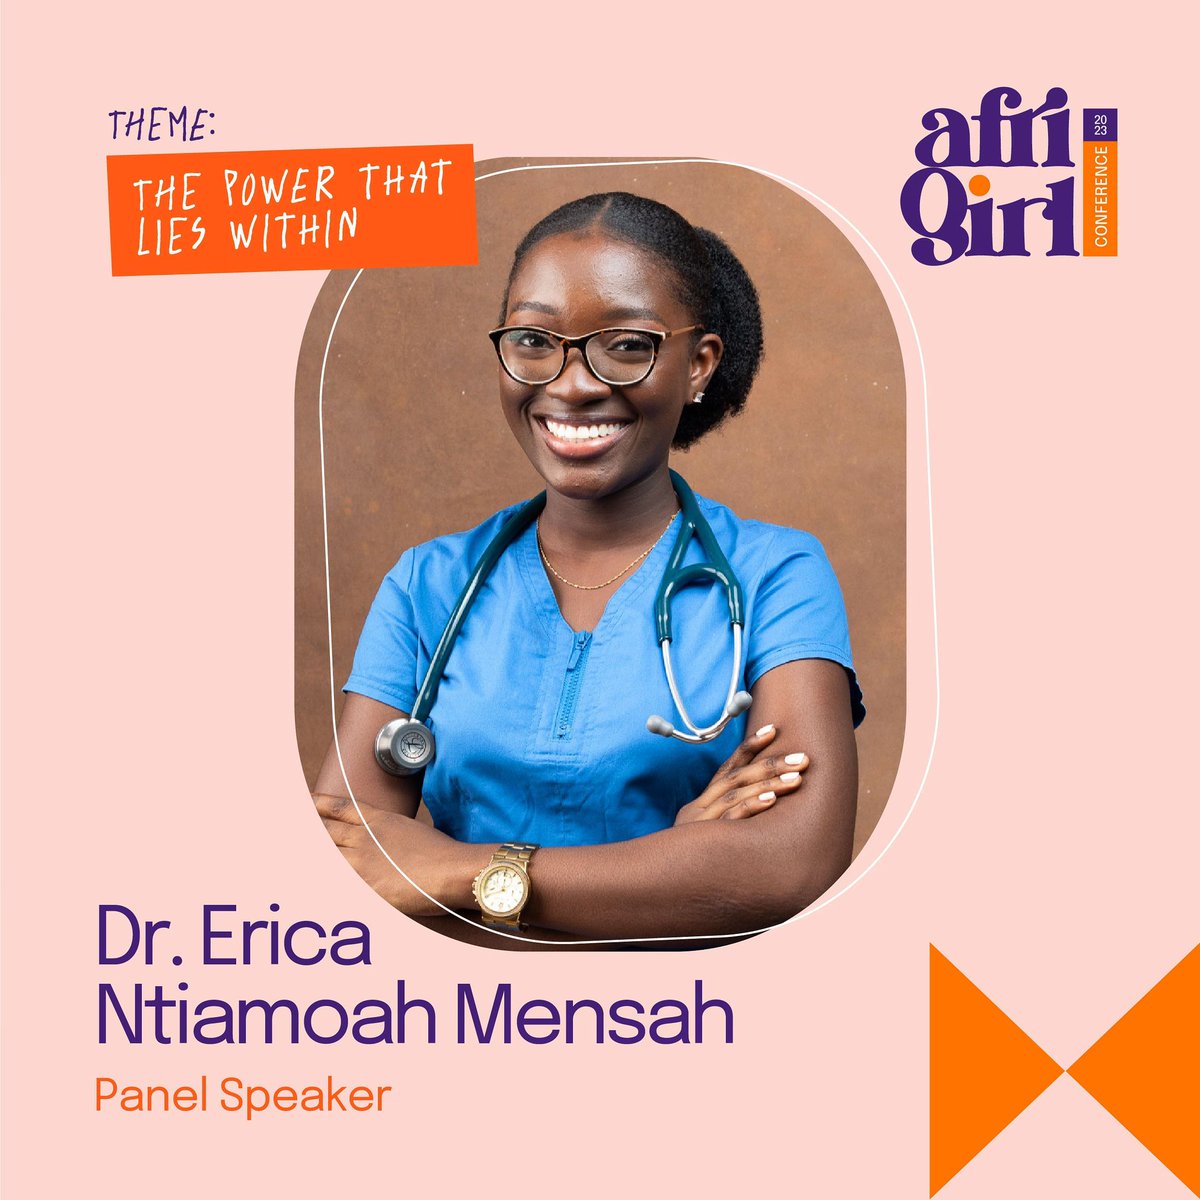 Introducing Dr. Erica Ntiamoah Mensah, Ghana's youngest medical doctor graduate at 21. She focuses on women's health, health education, etc. Join her as a panel speaker at the AfriGirl Conference. #panel #panelspeaker #speaker #afrigirlconference #afrigirlcon #ag2023